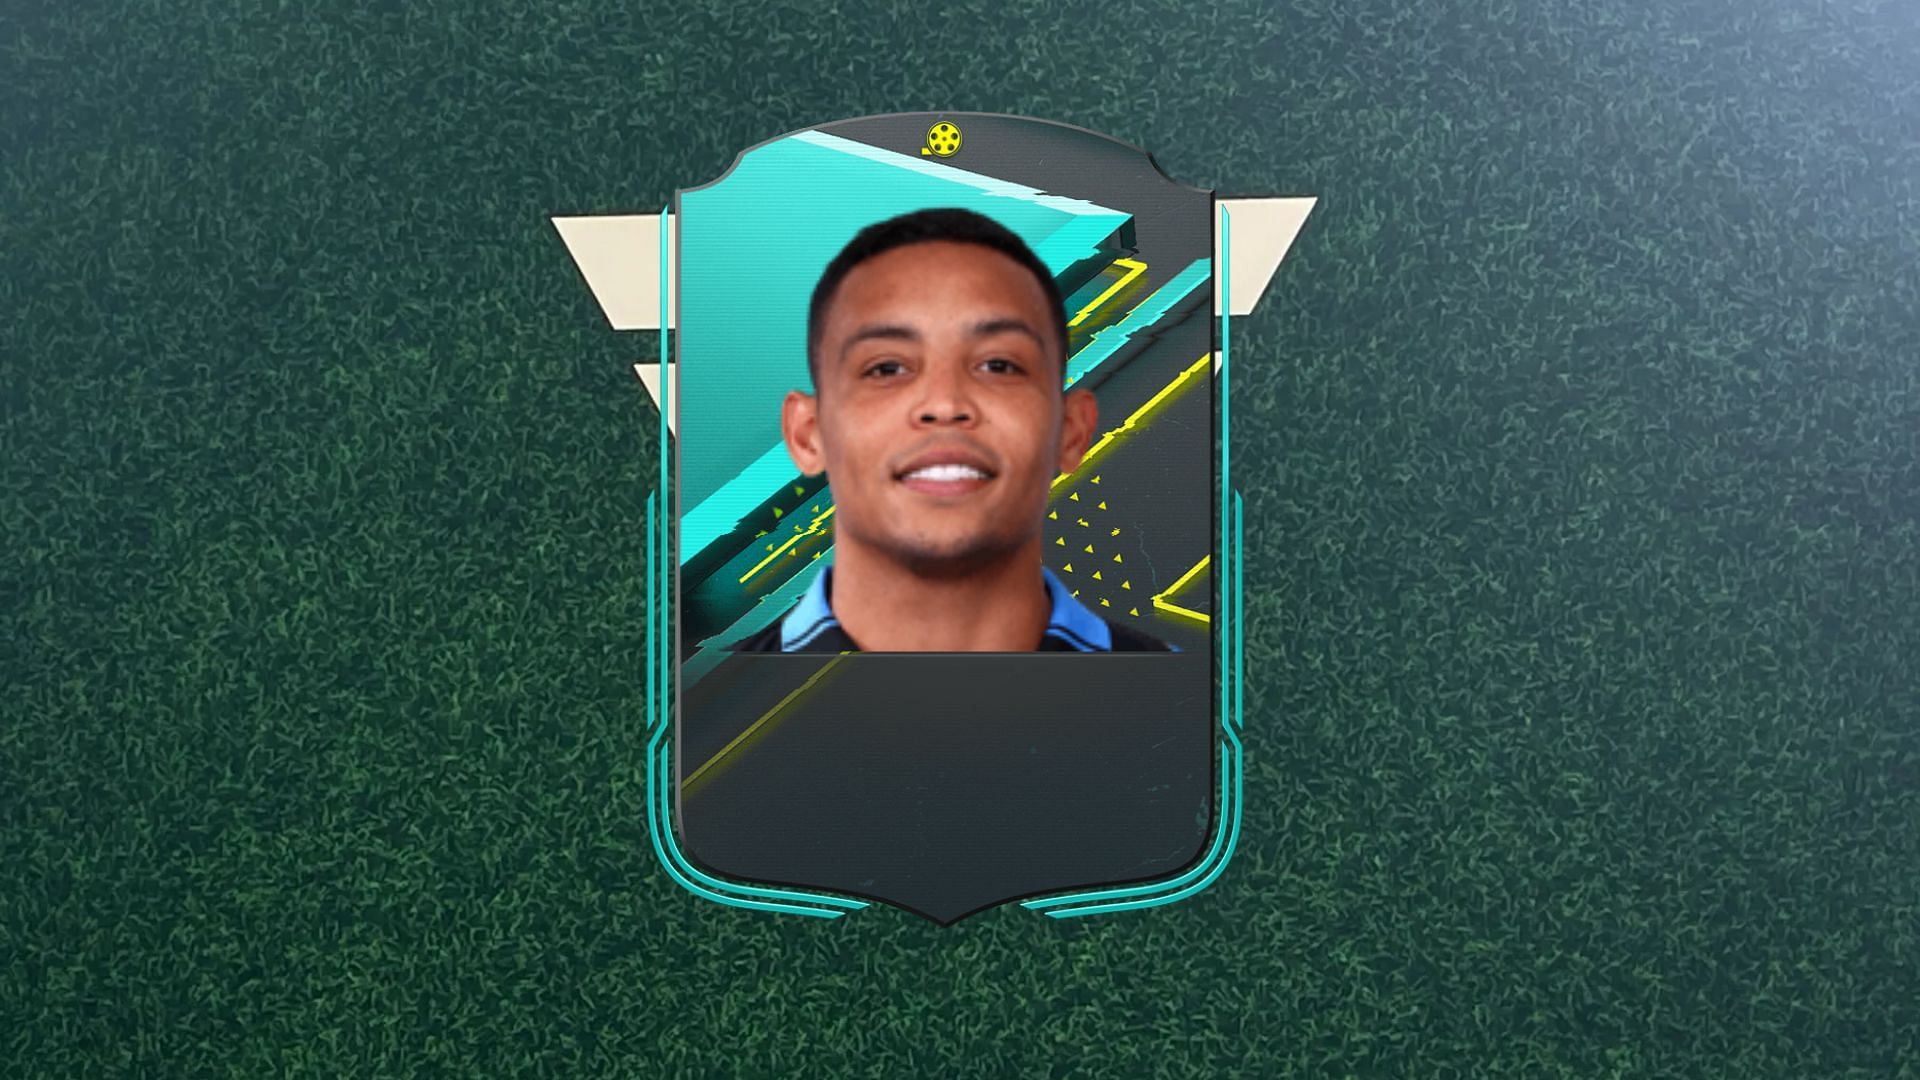 A new Player Moments SBC is available in EA FC 24 (Image via EA Sports)